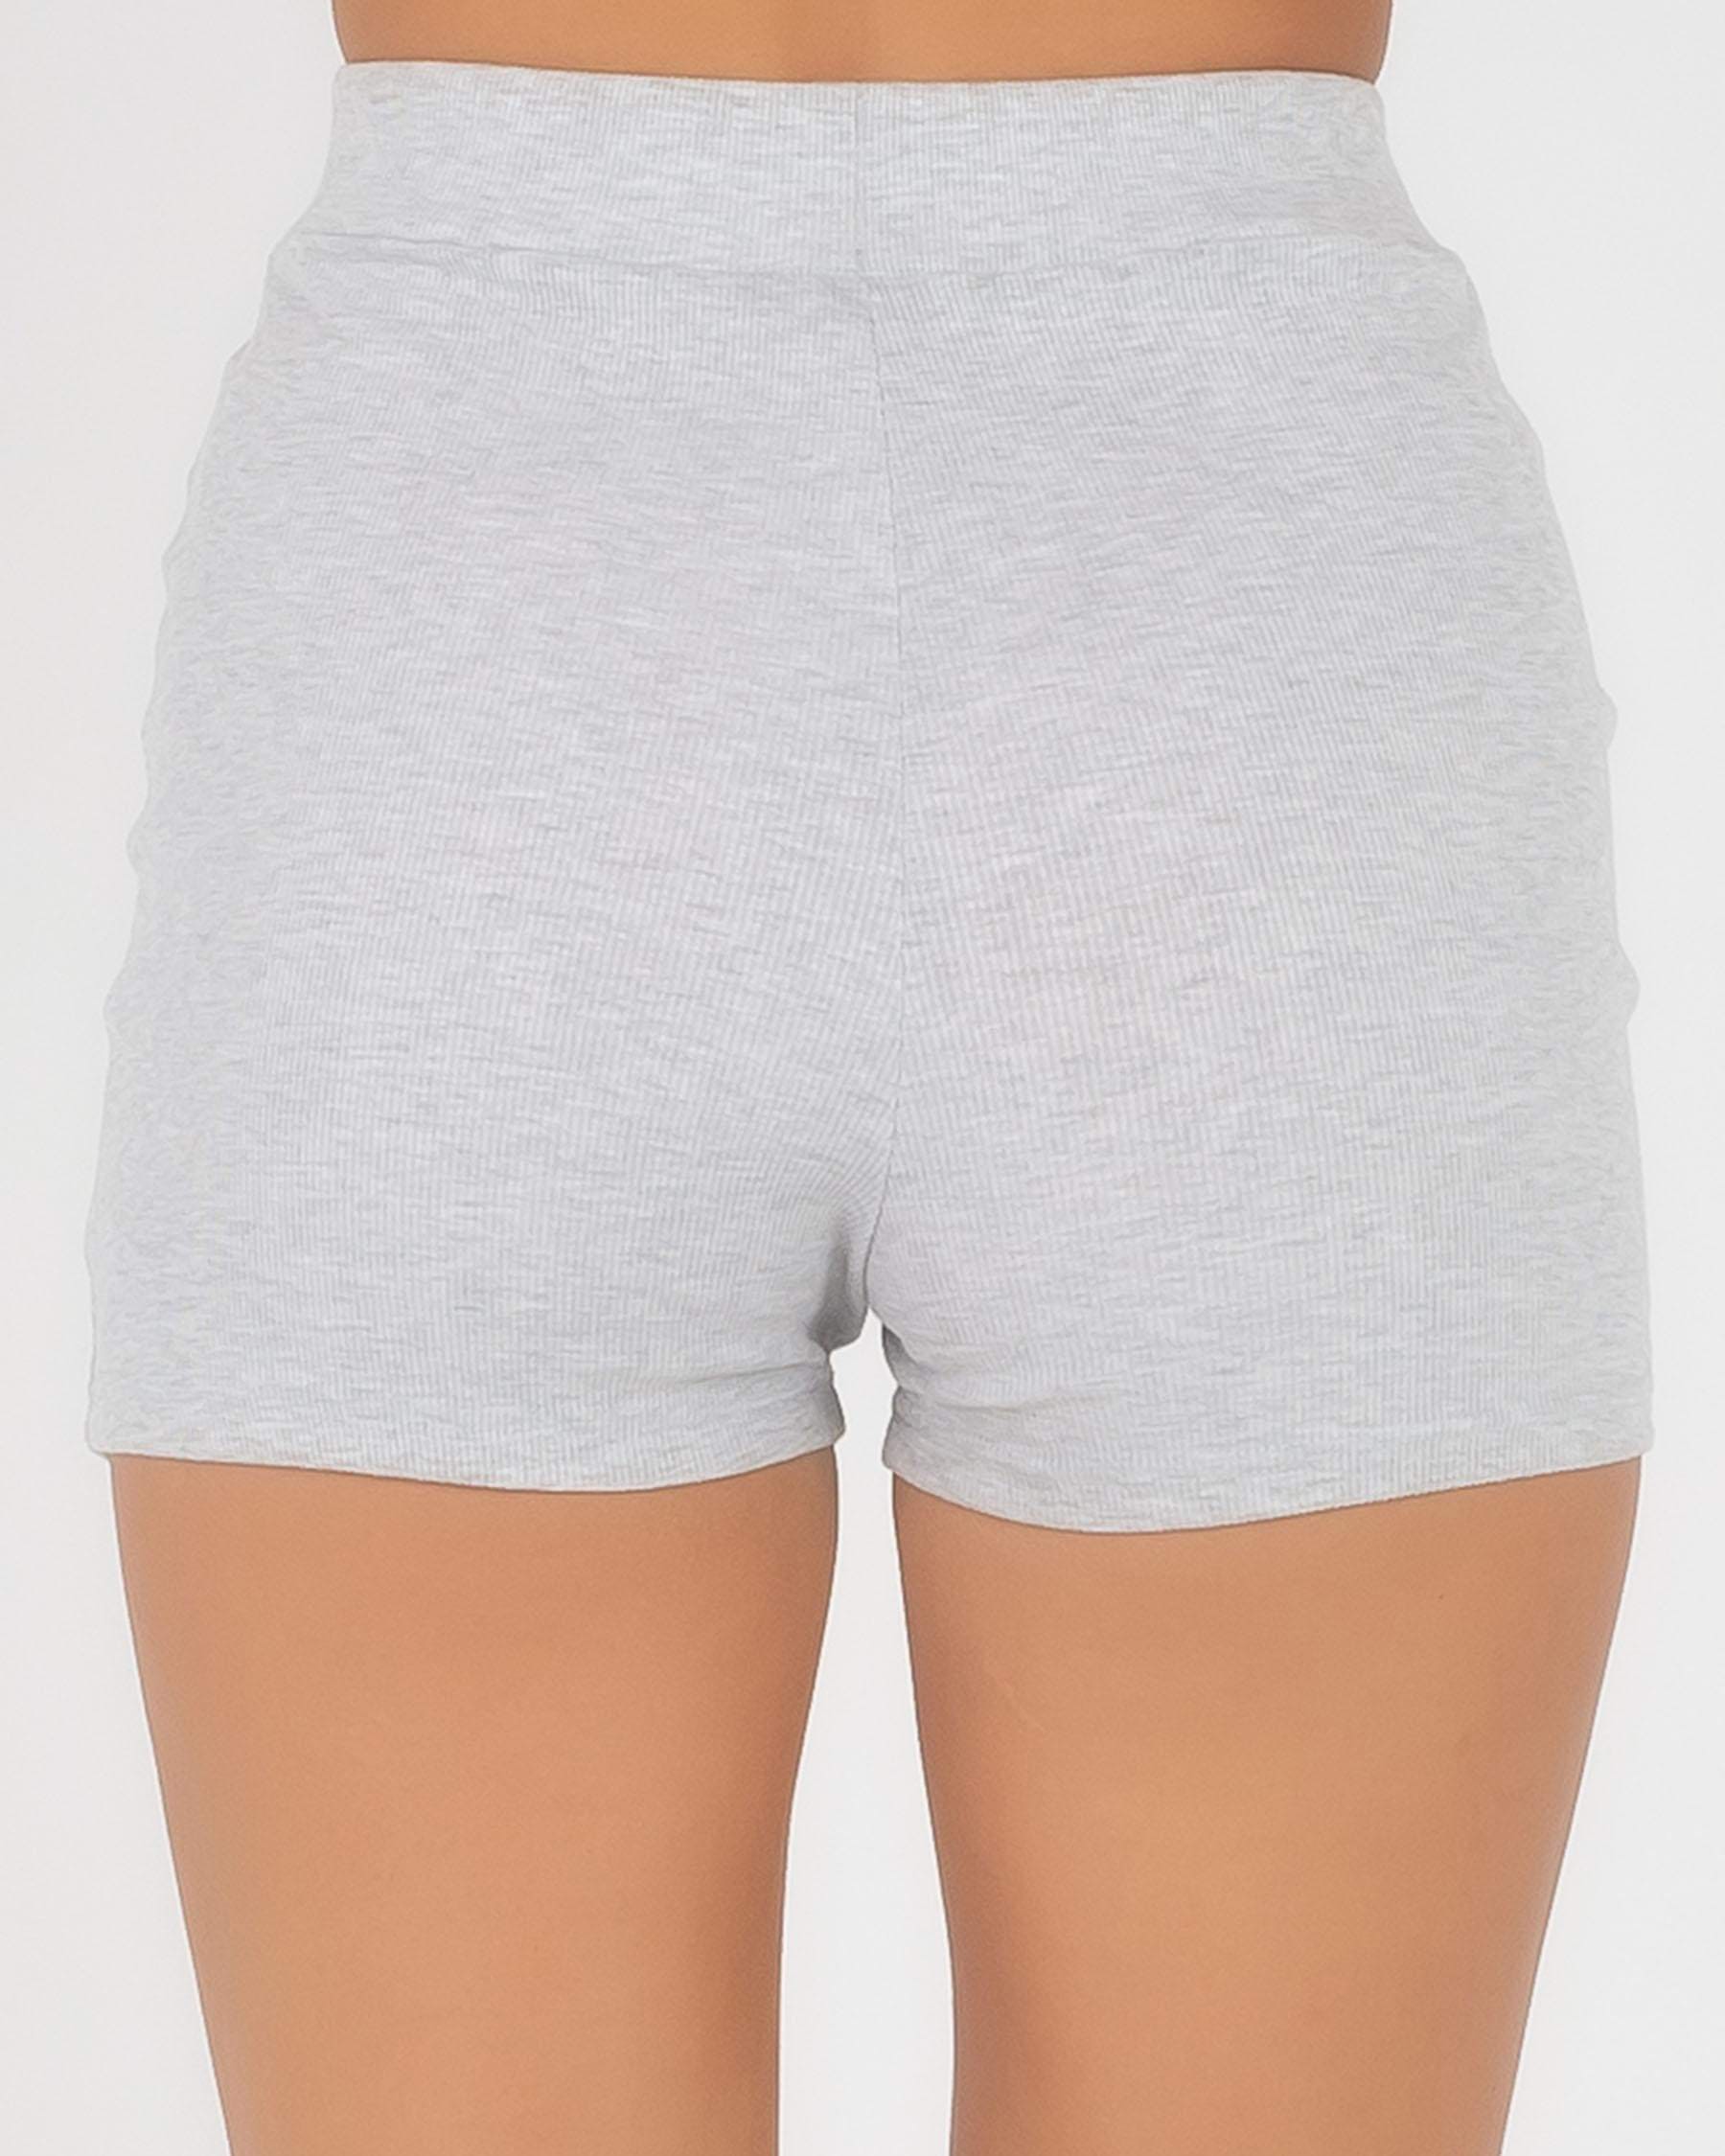 Ava And Ever Koko Bike Shorts In Grey Marle - Fast Shipping & Easy ...